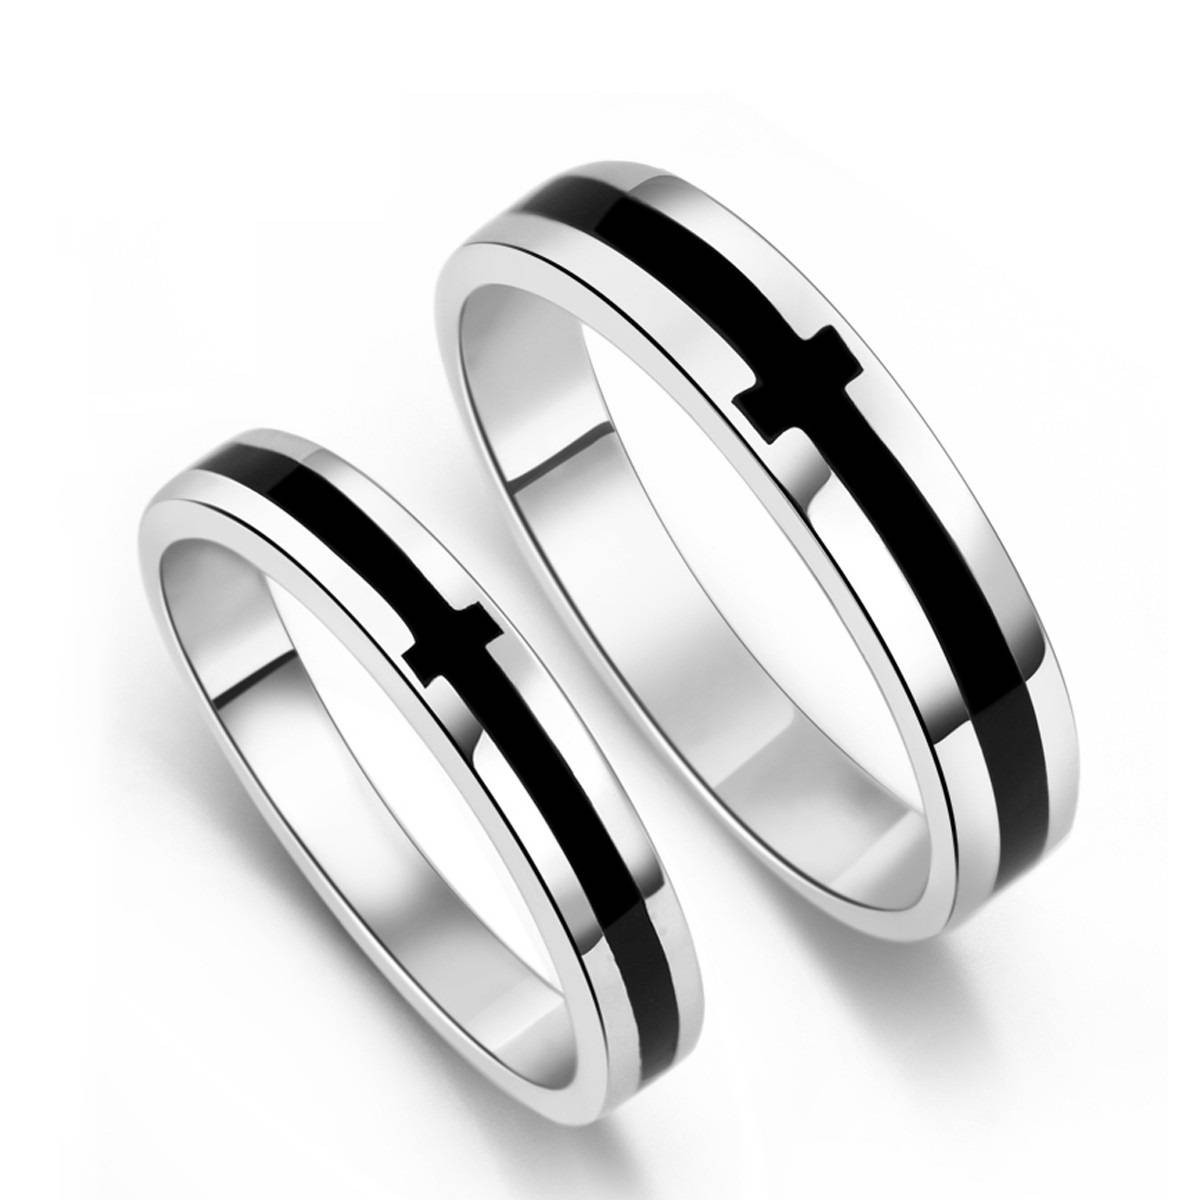 Black Onyx Wedding Ring
 15 Best Collection of Mens Black yx Wedding Rings